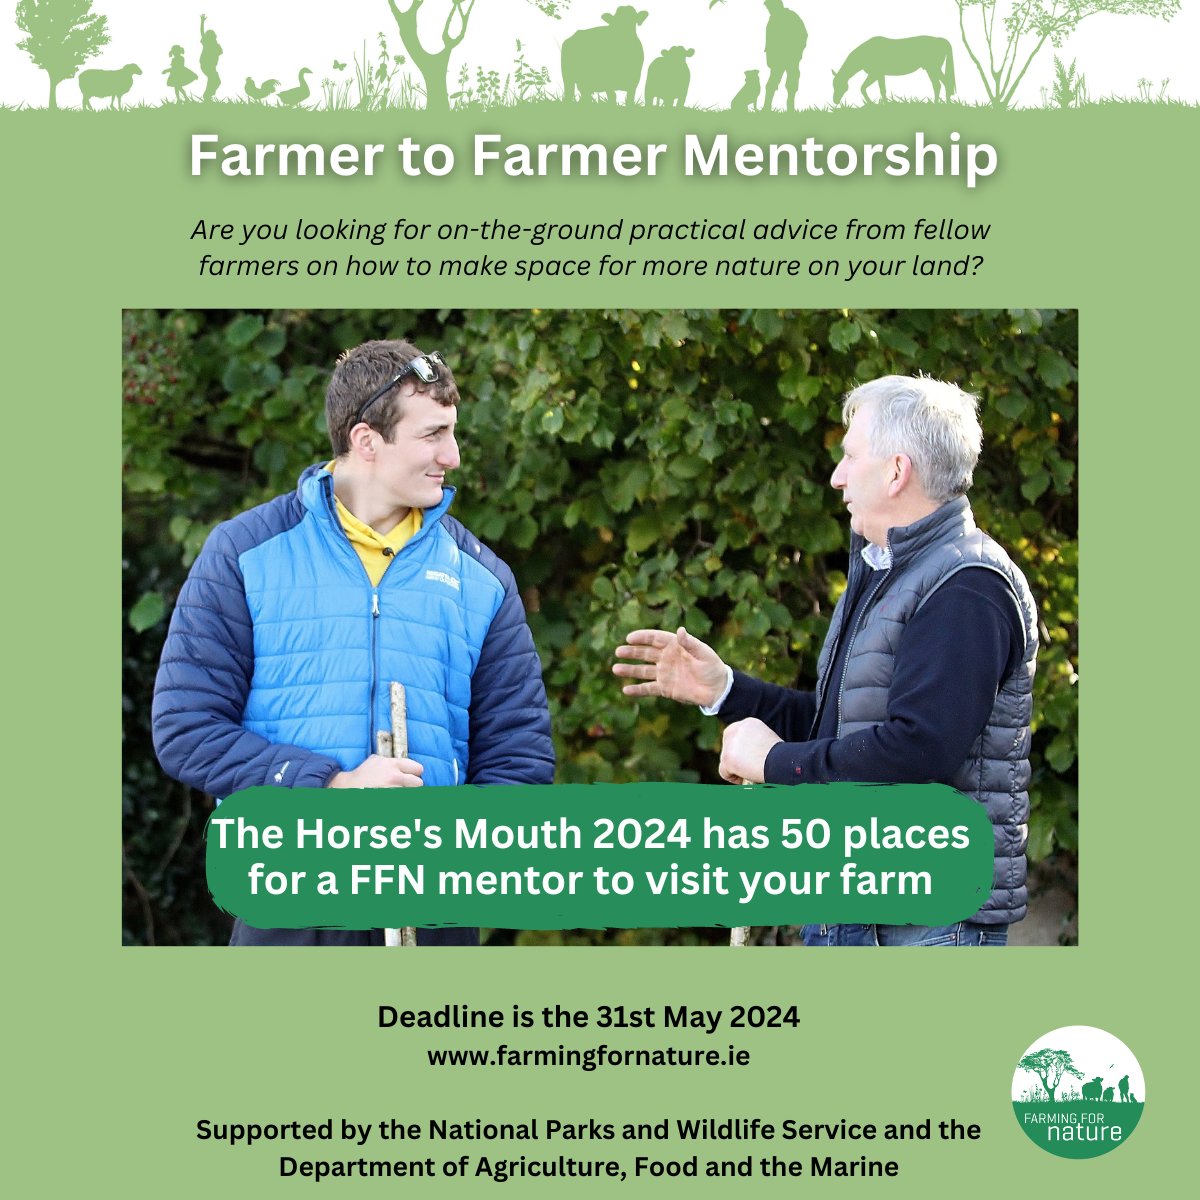 Our Horse's Mouth farmer to farmer mentorship programme is open for applications until May 31. Get advice from another farmer on how to make space on your farm for nature 🐞🐸🦉🦇🌿 50 places available! Apply here - bit.ly/TheHorsesMouth